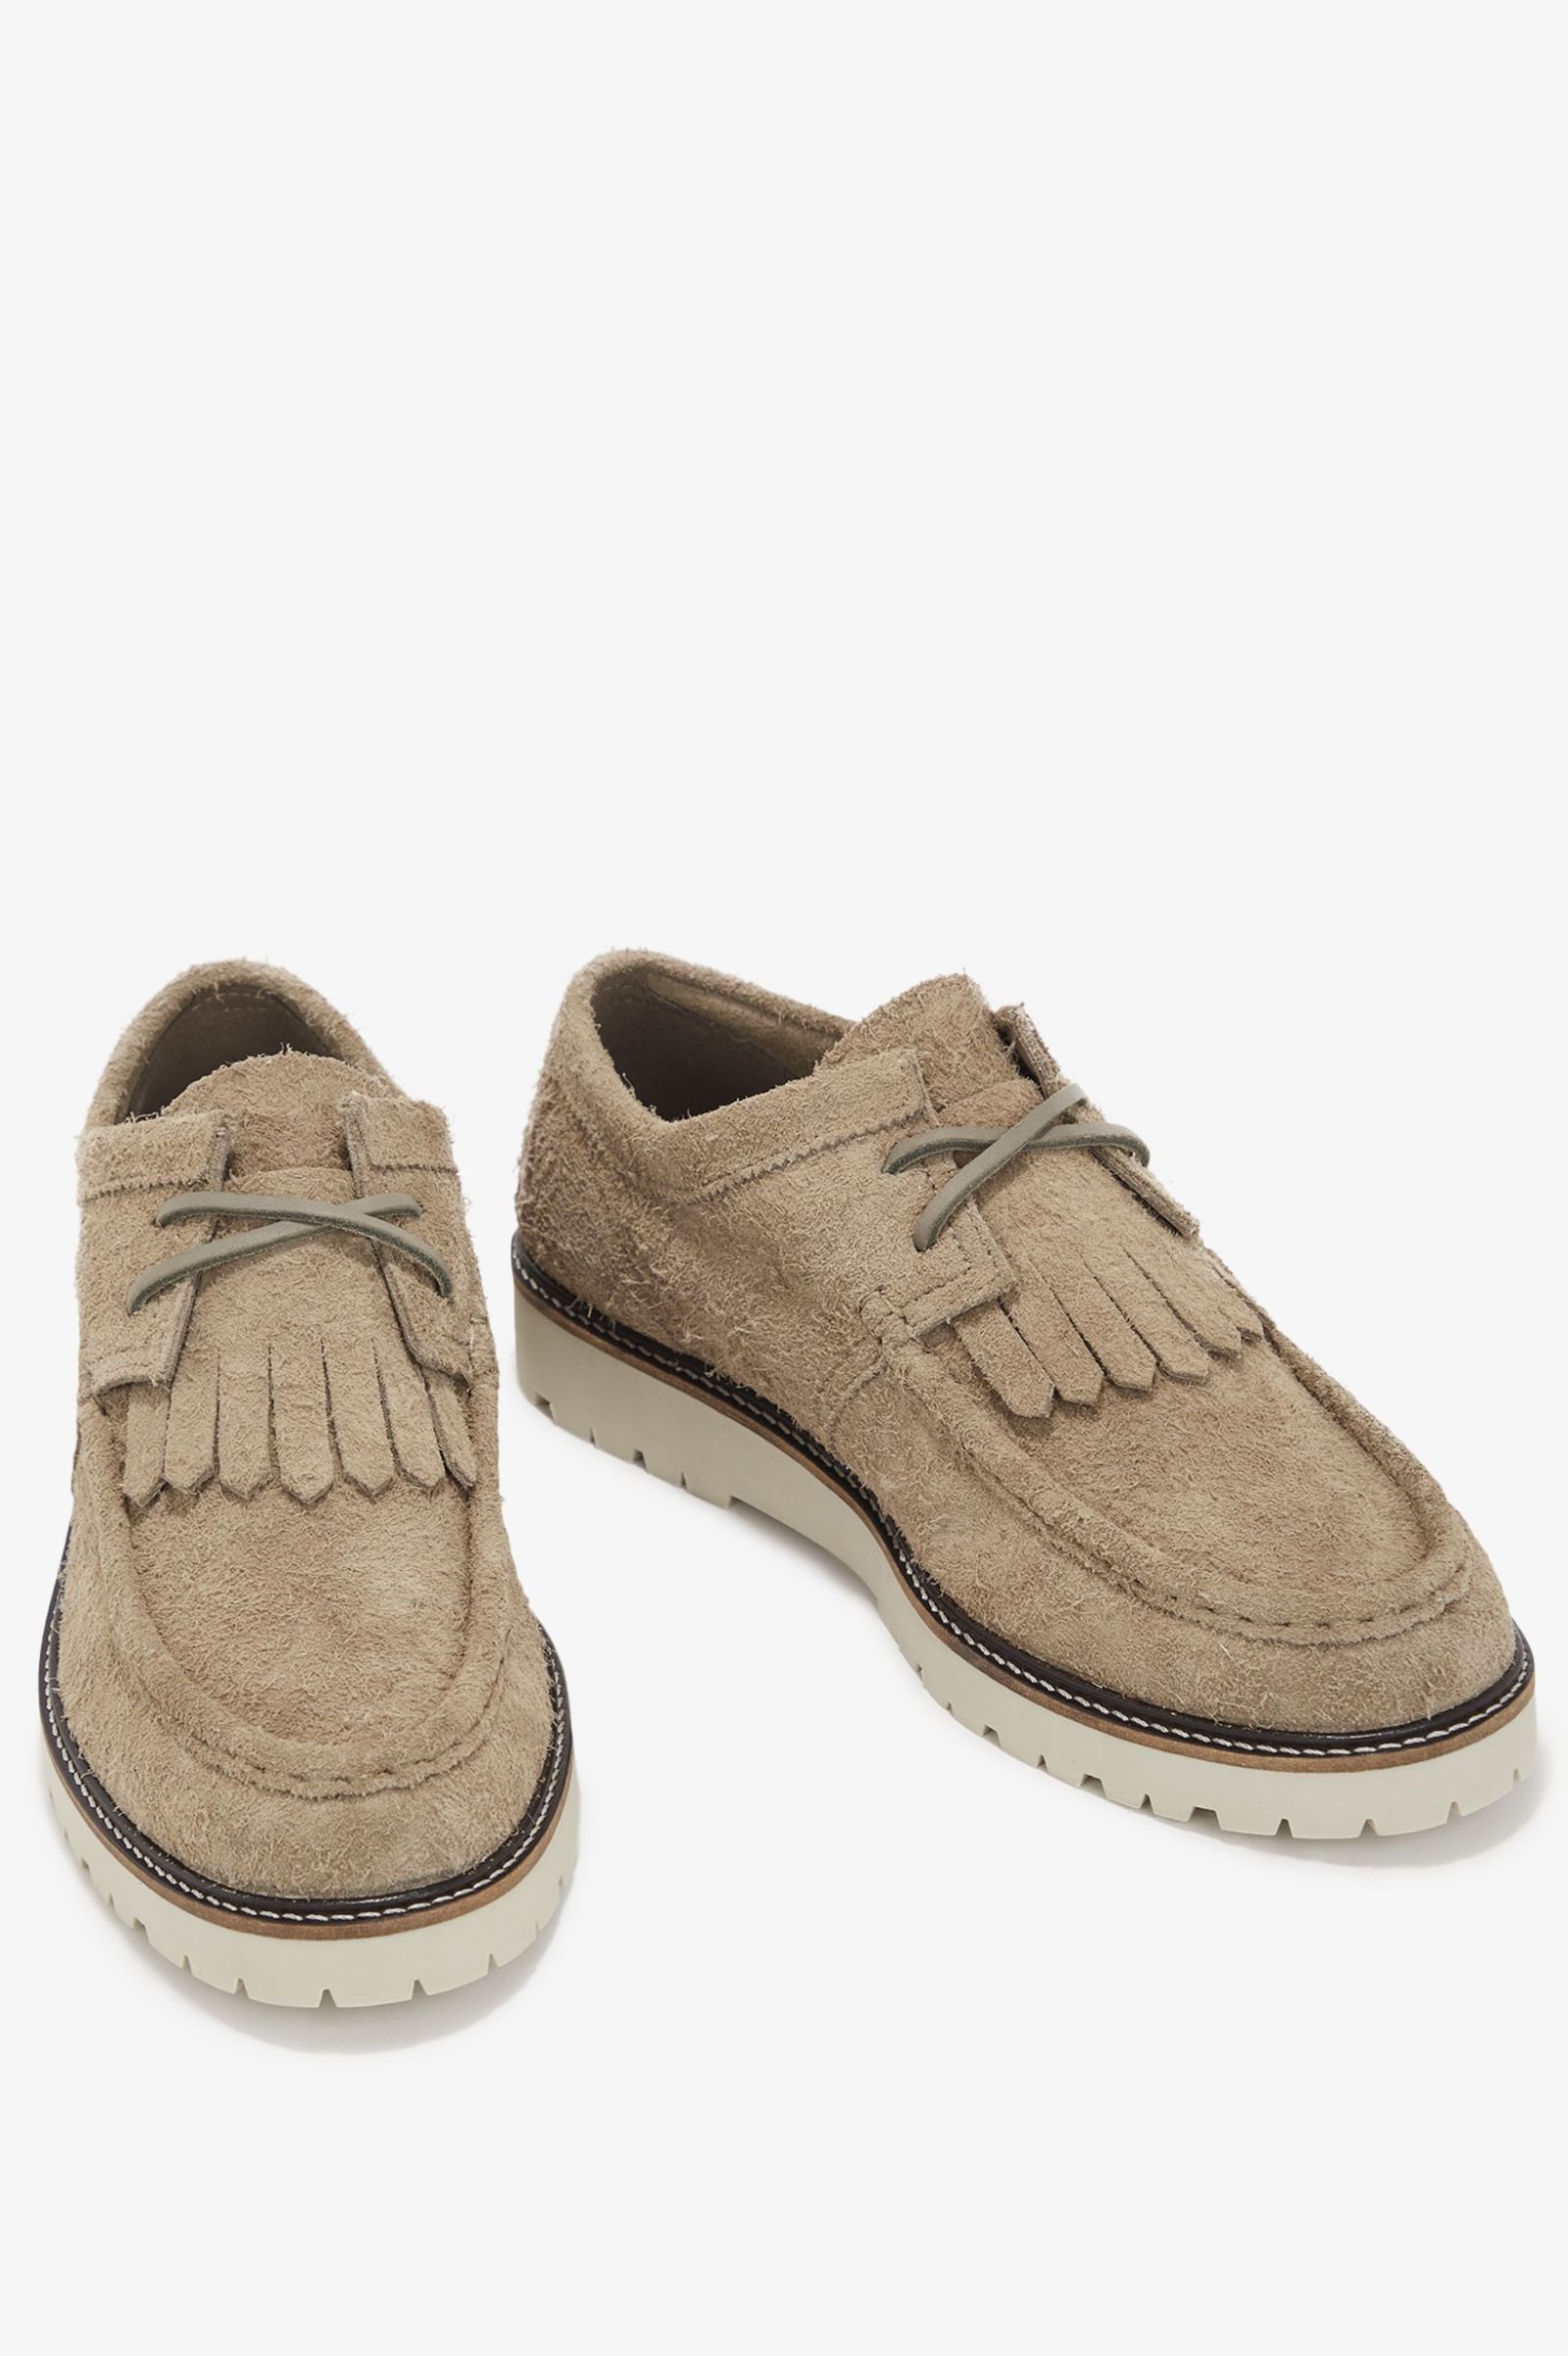 Fred Perry Low Kenney Hairy Suede in Warm Grey 